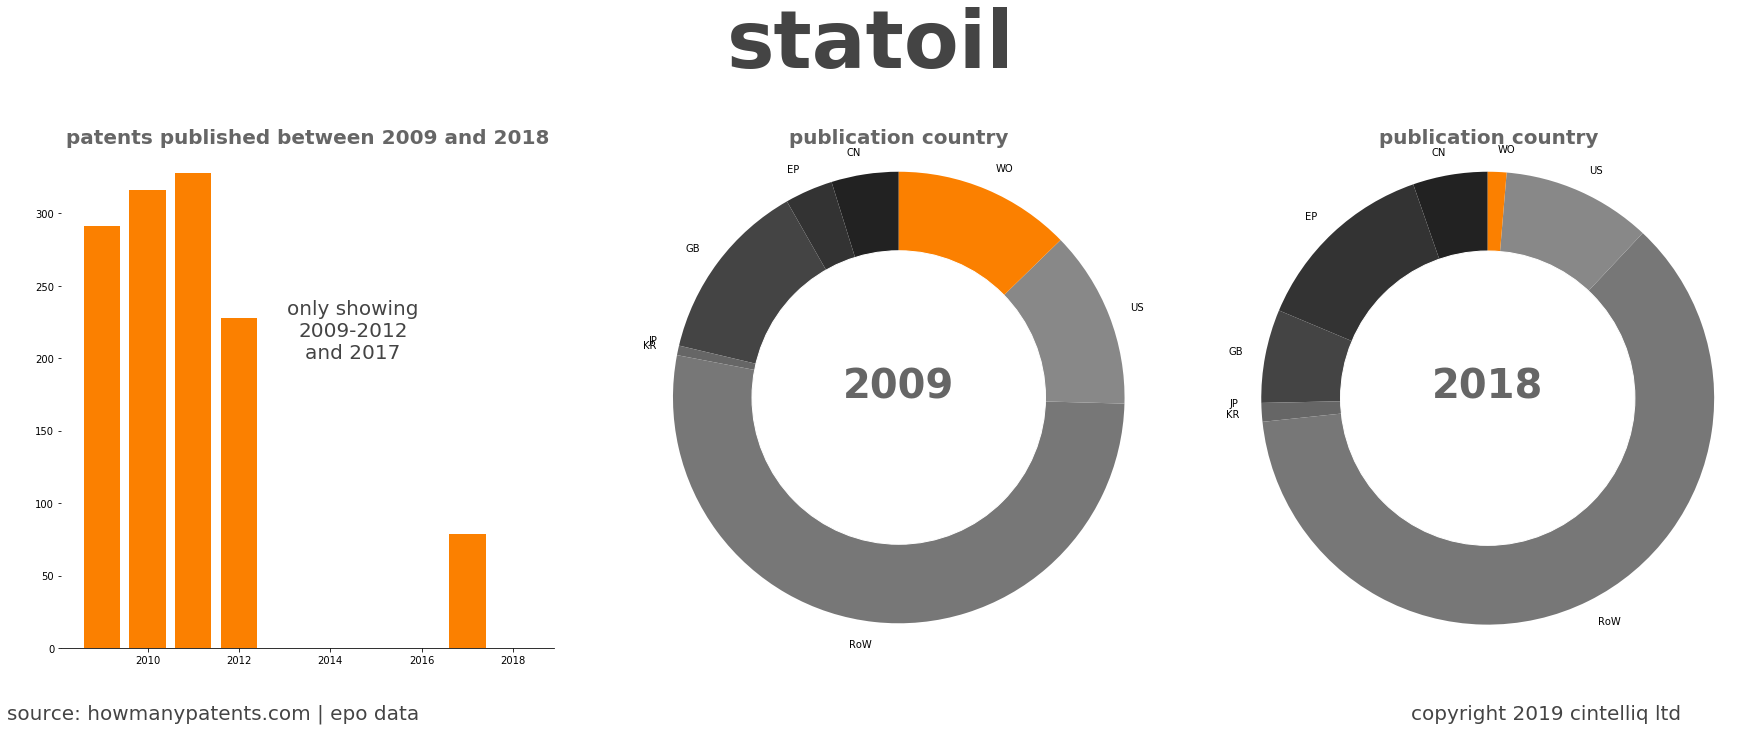 summary of patents for Statoil